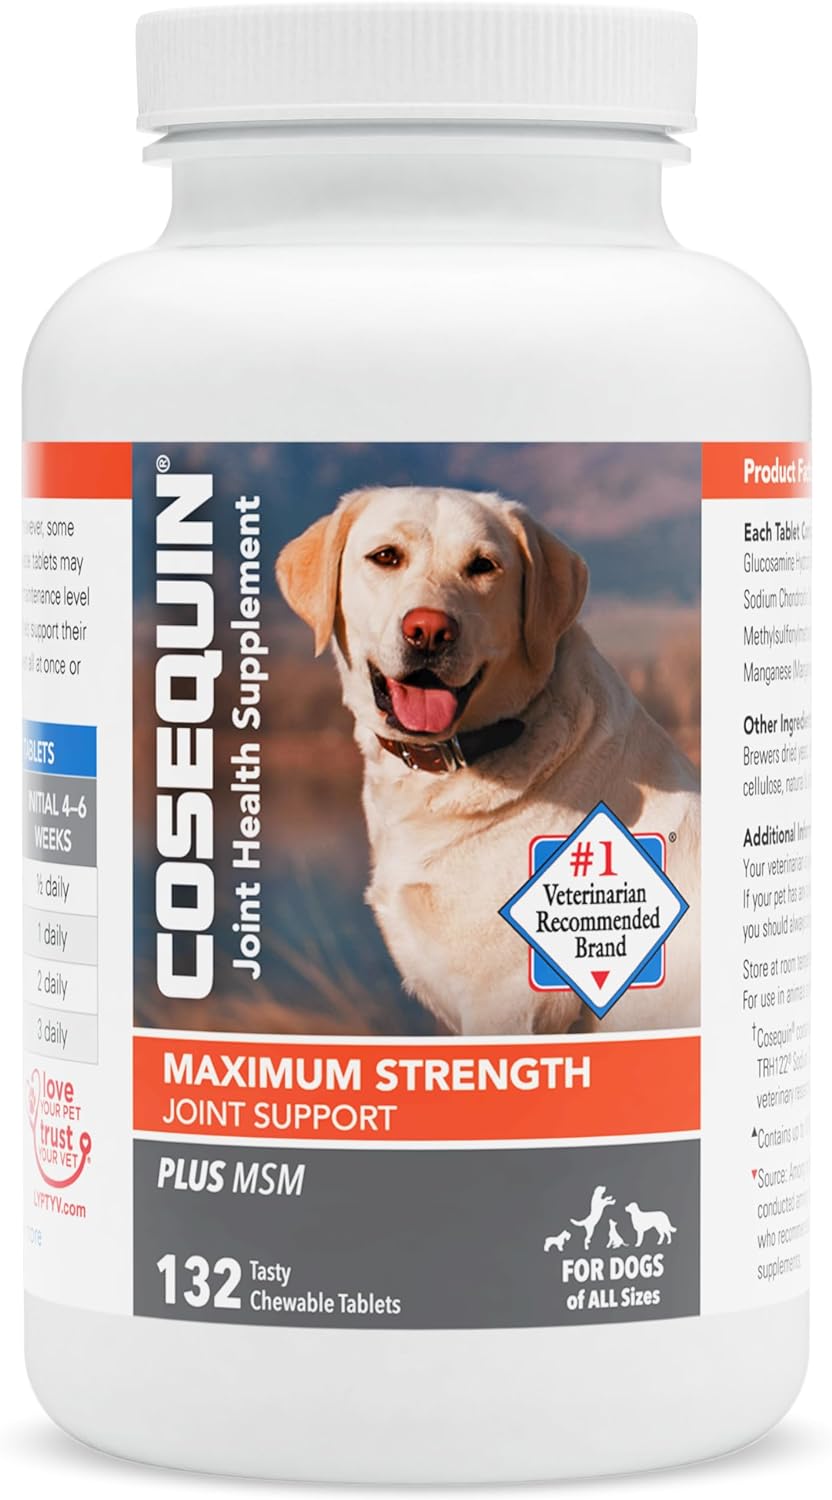 Nutramax Cosequin DS Plus with MSM Chewable Tablets, 132 Ct